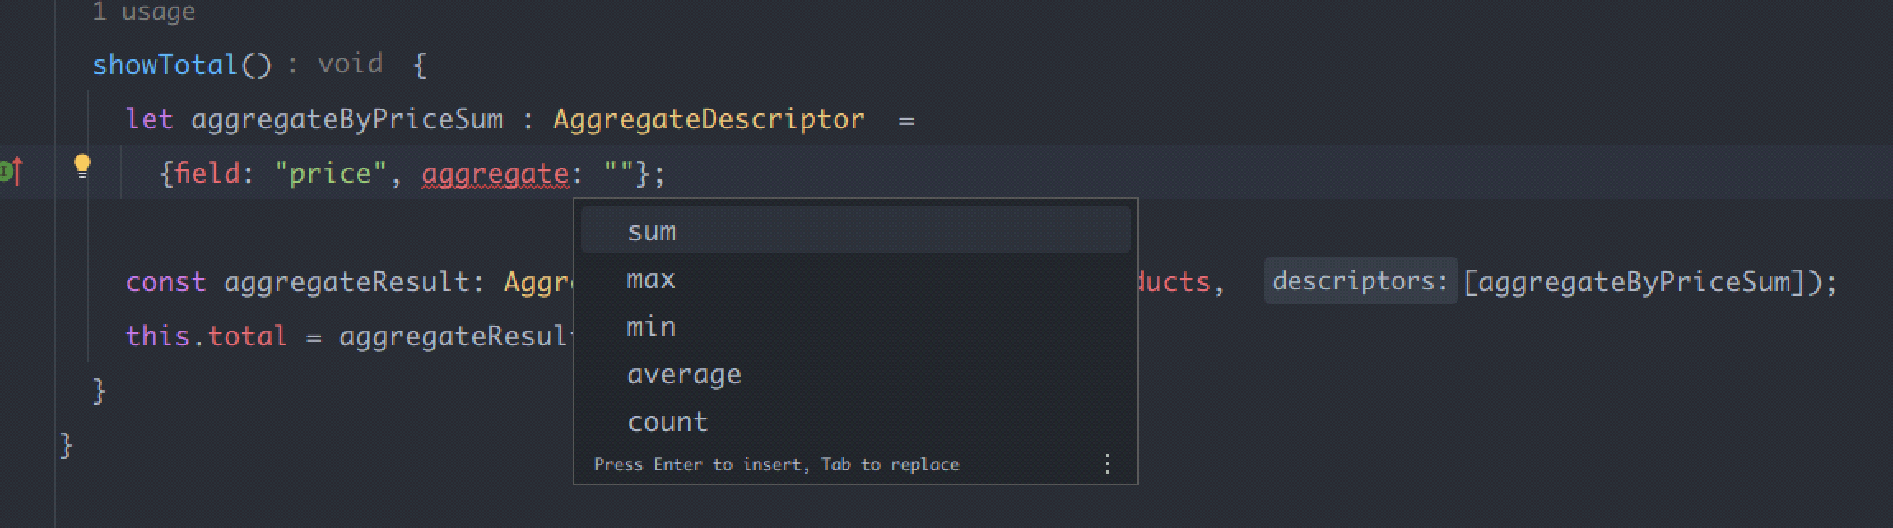 Code with predictive text suggestions with aggregation options including sum, max, min, average, count